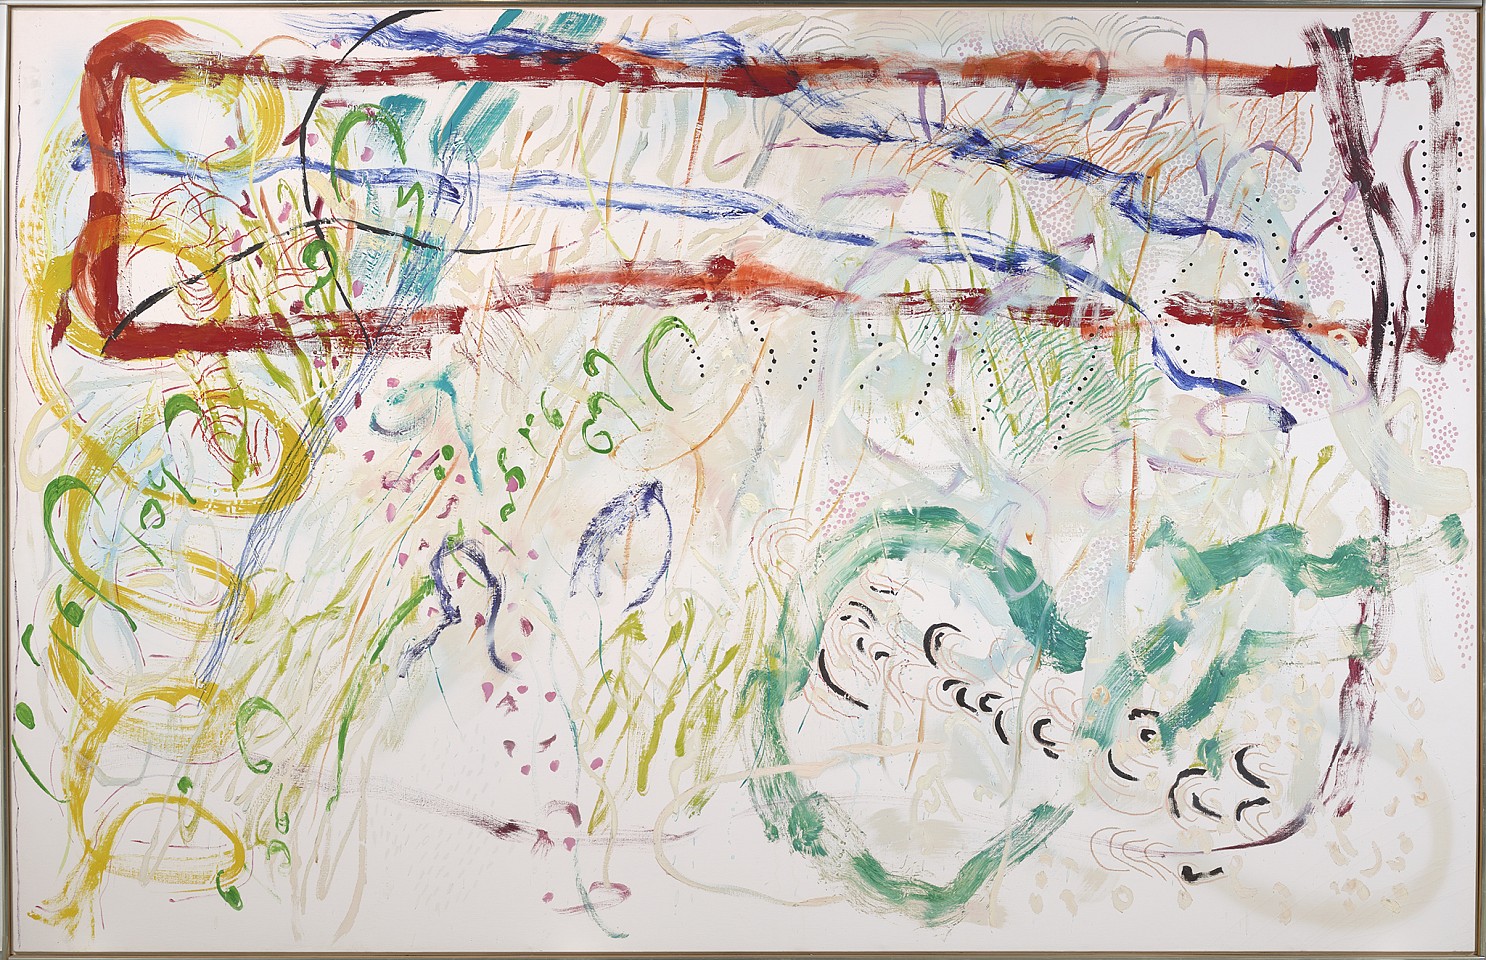 Nancy Graves, Hint, 1978
Oil on canvas with encaustic, 65 x 101 in. (165.1 x 256.5 cm)
GRA-00003